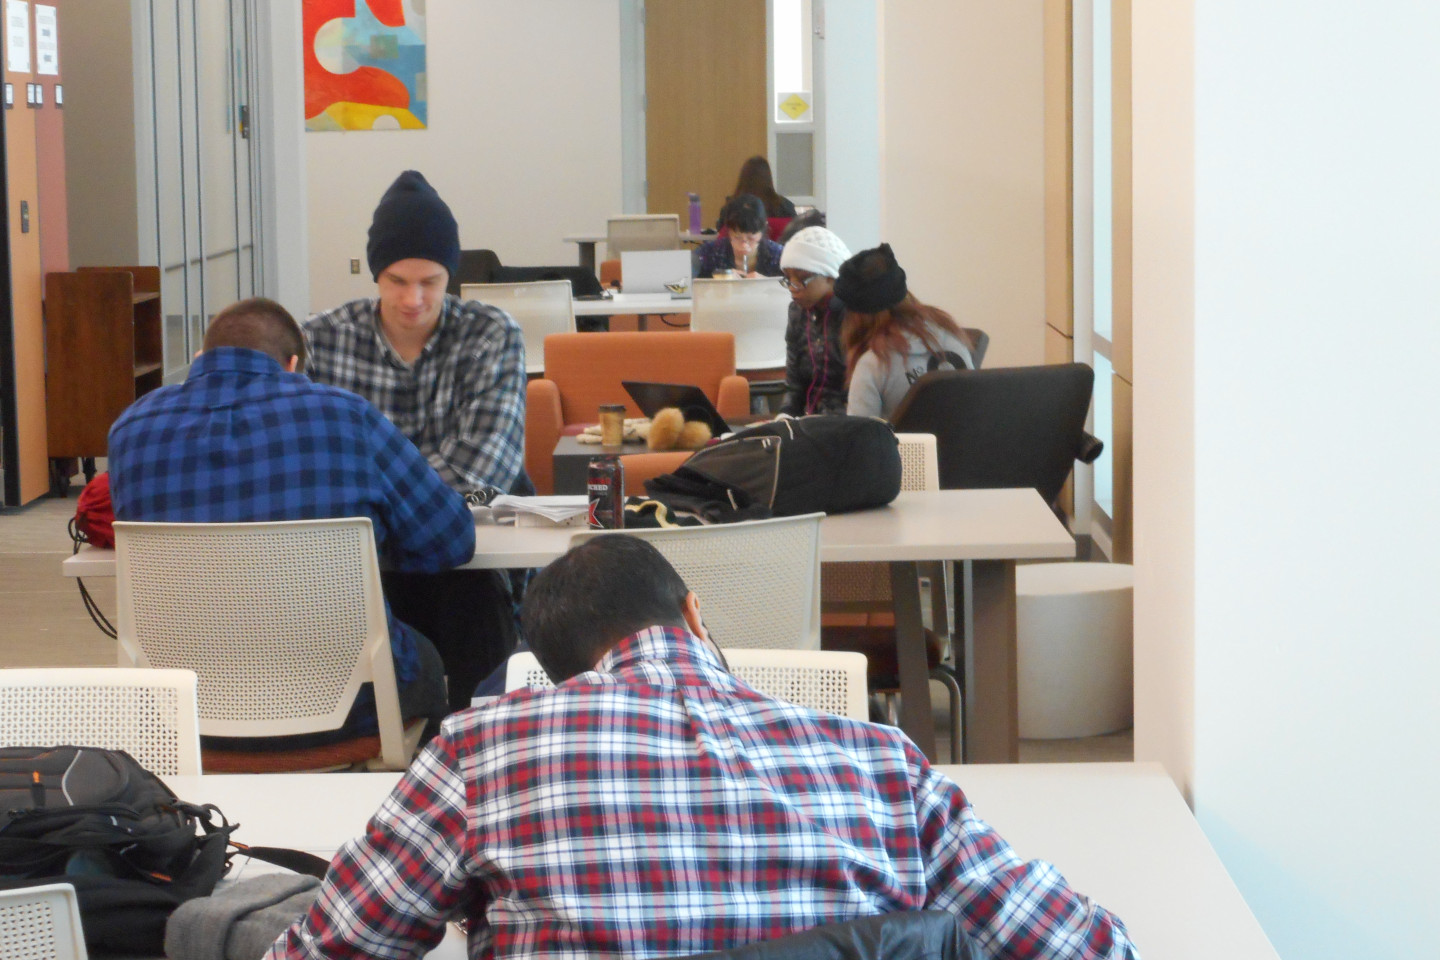 Students studying in Swain Library located in Sangren Hall.